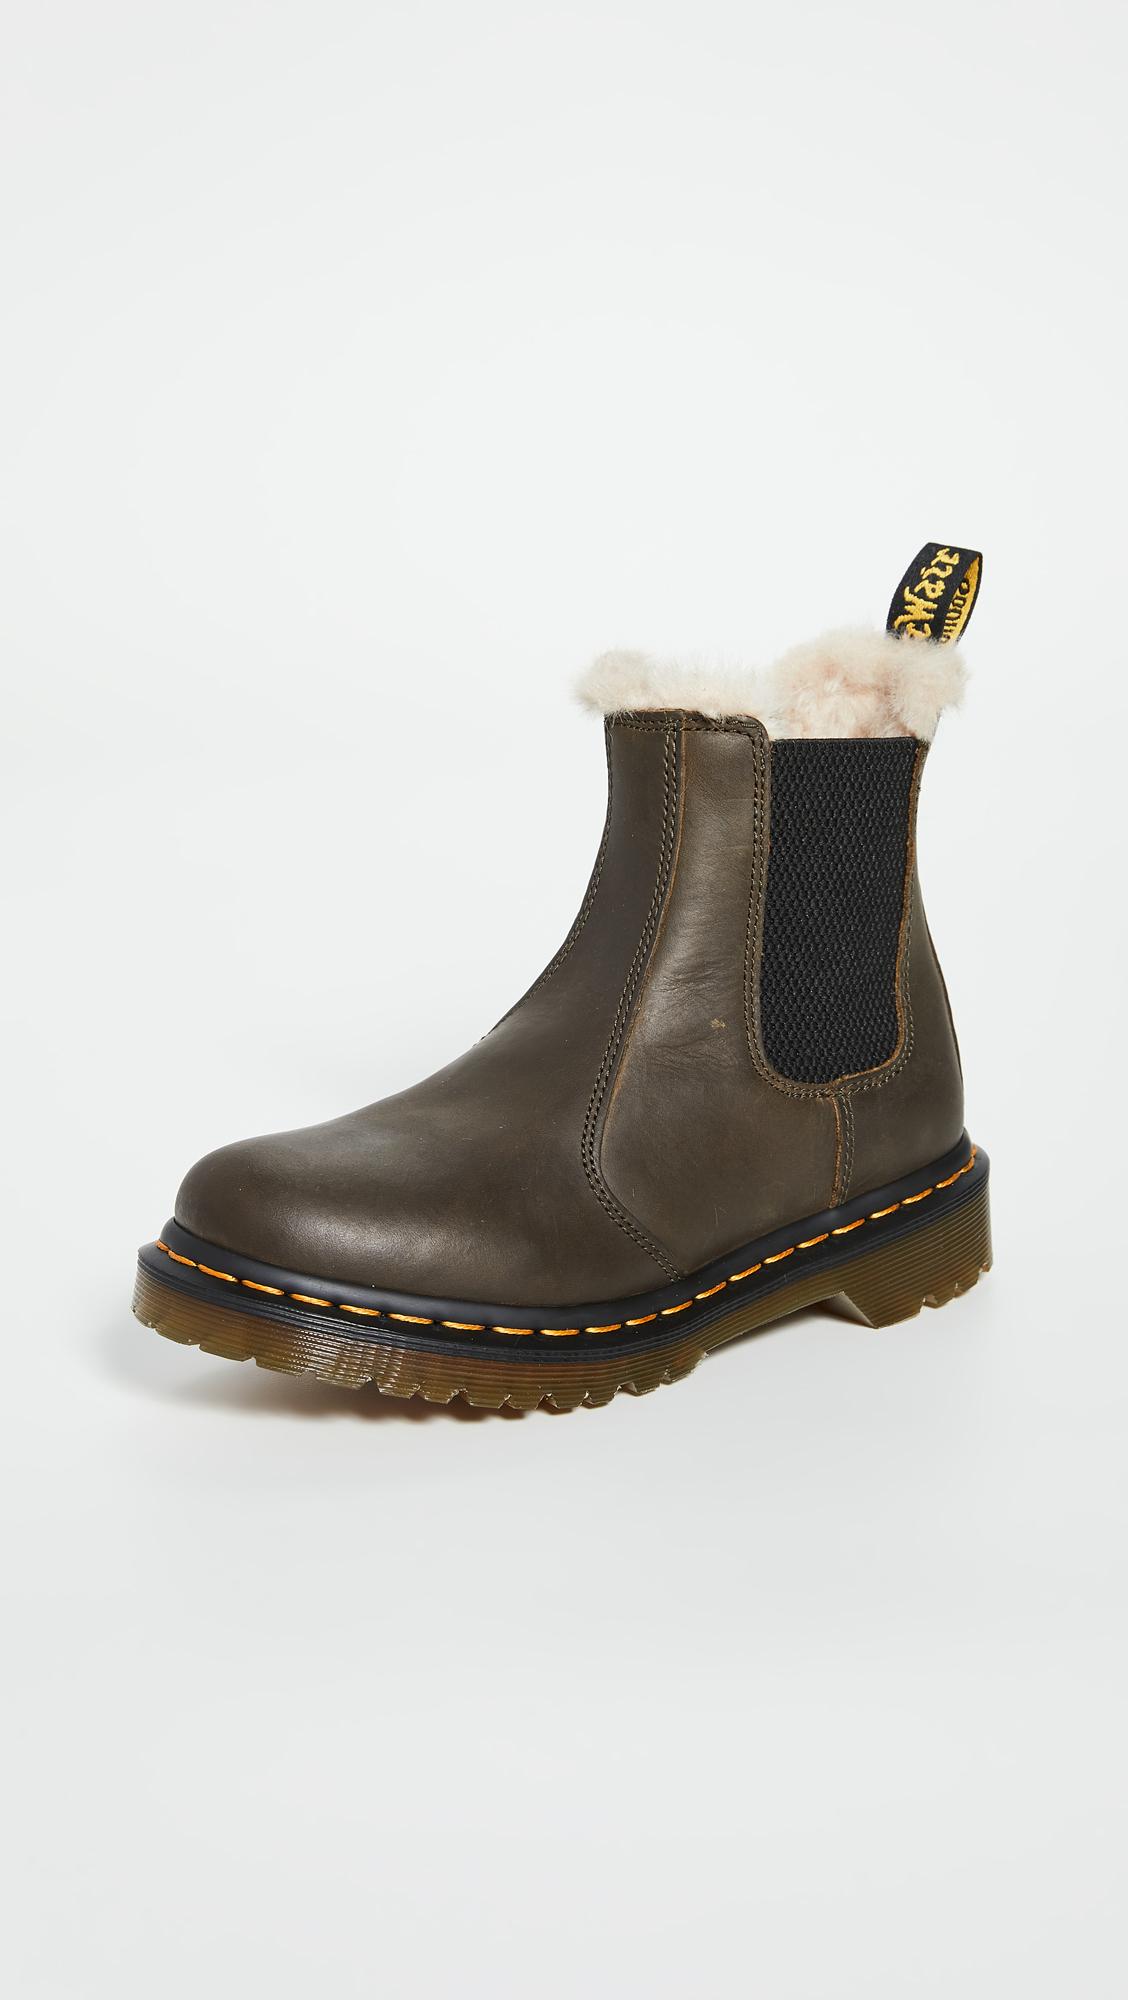 Dr. Martens 2976 Leonore Chelsea Boots in Olive (Green) | Lyst